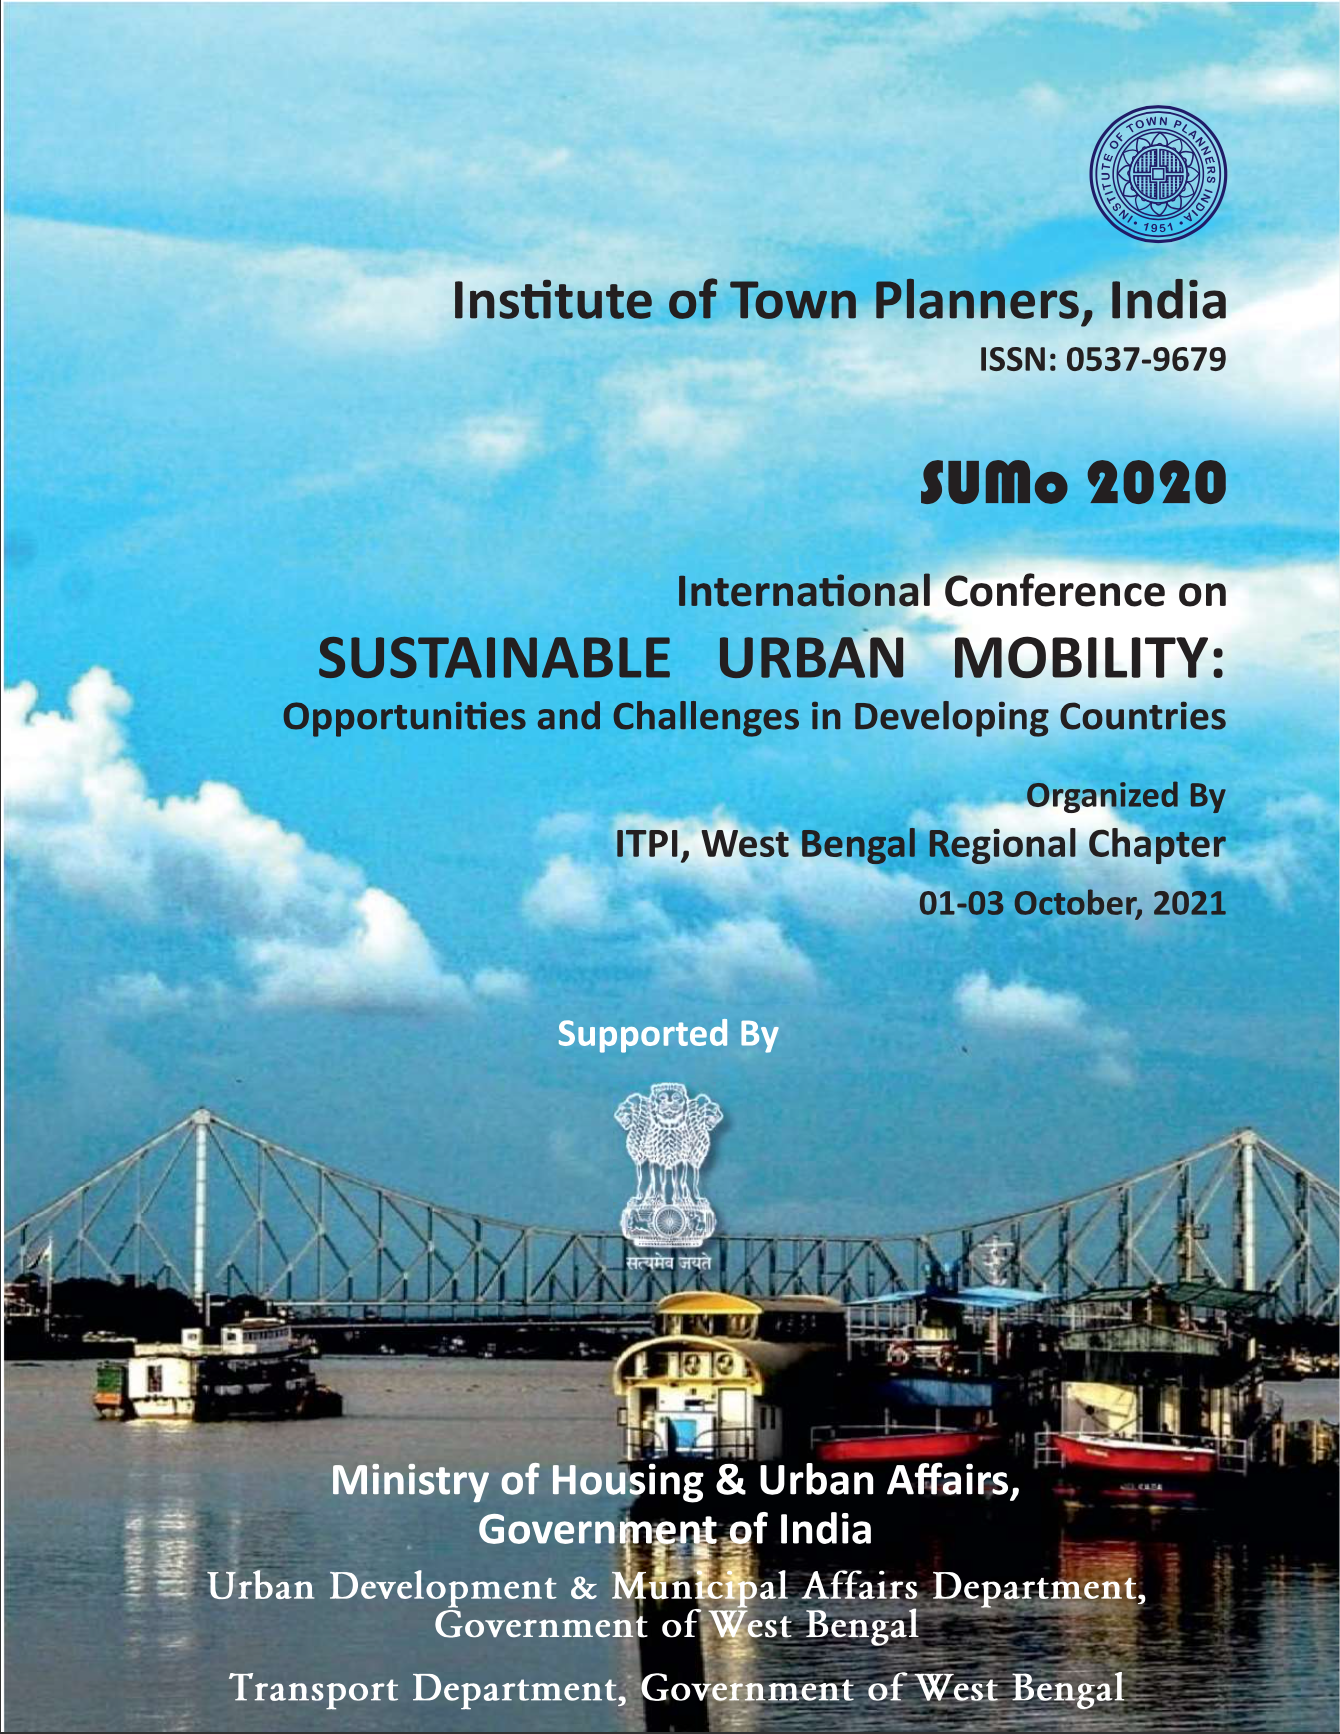 SUSTAINABLE URBAN MOBILITY: Opportunities and Challenges in Developing Countries